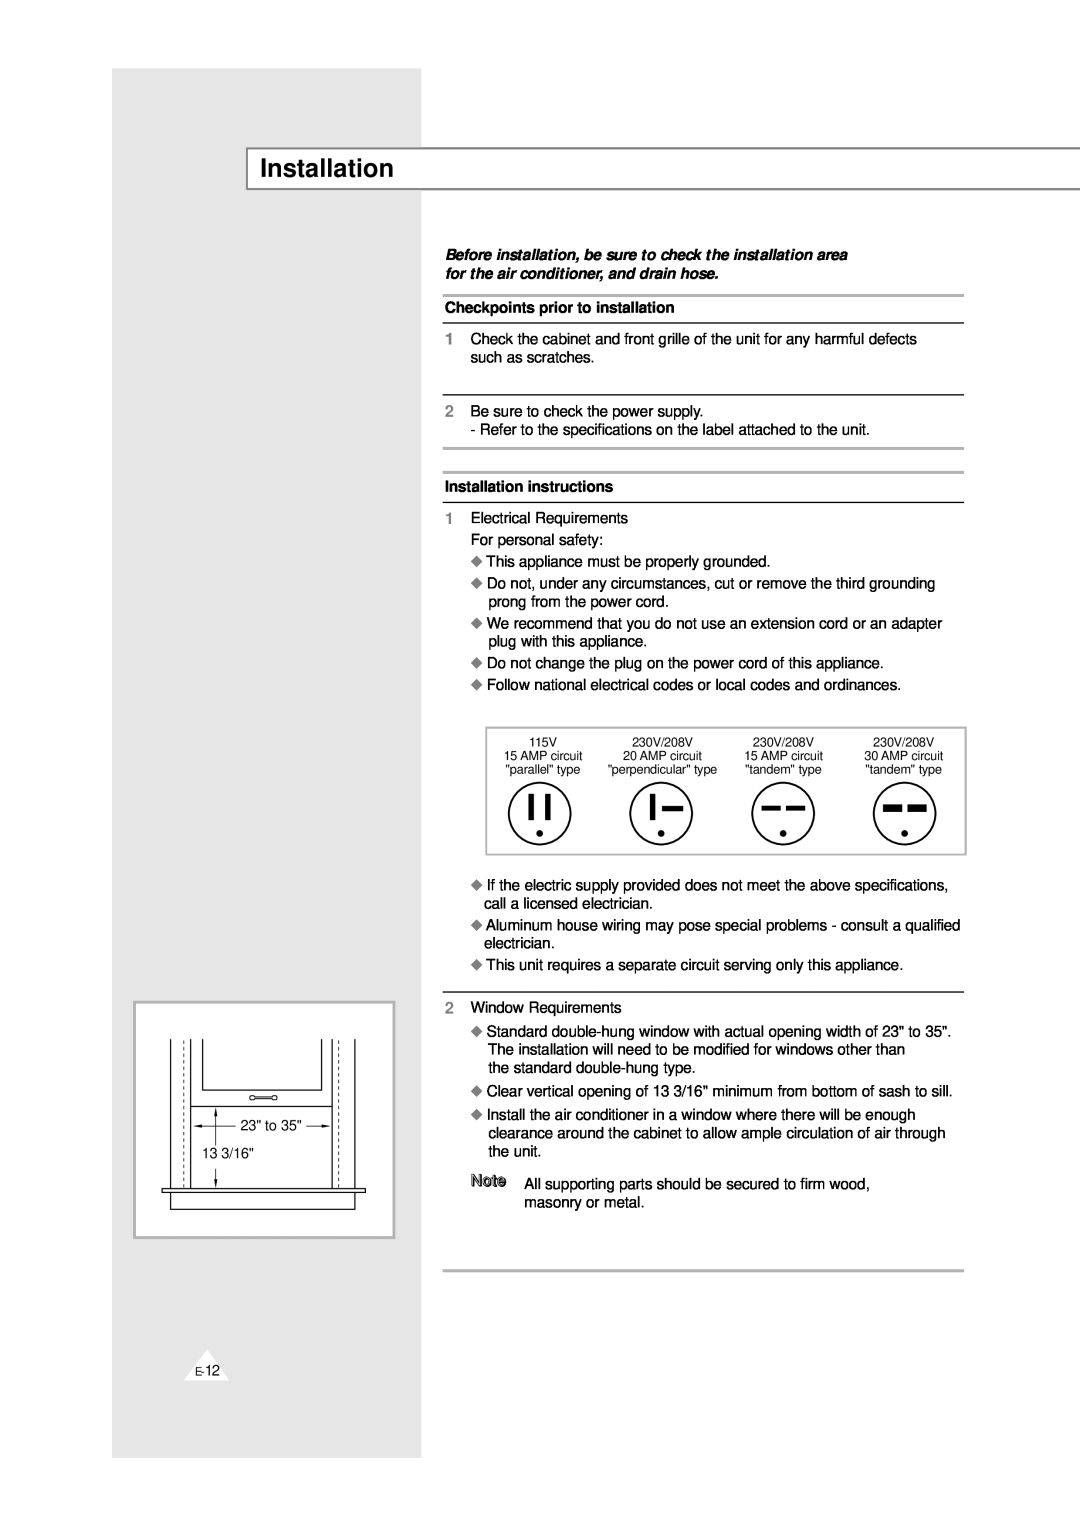 Samsung AW0529 manual Checkpoints prior to installation, Installation instructions 